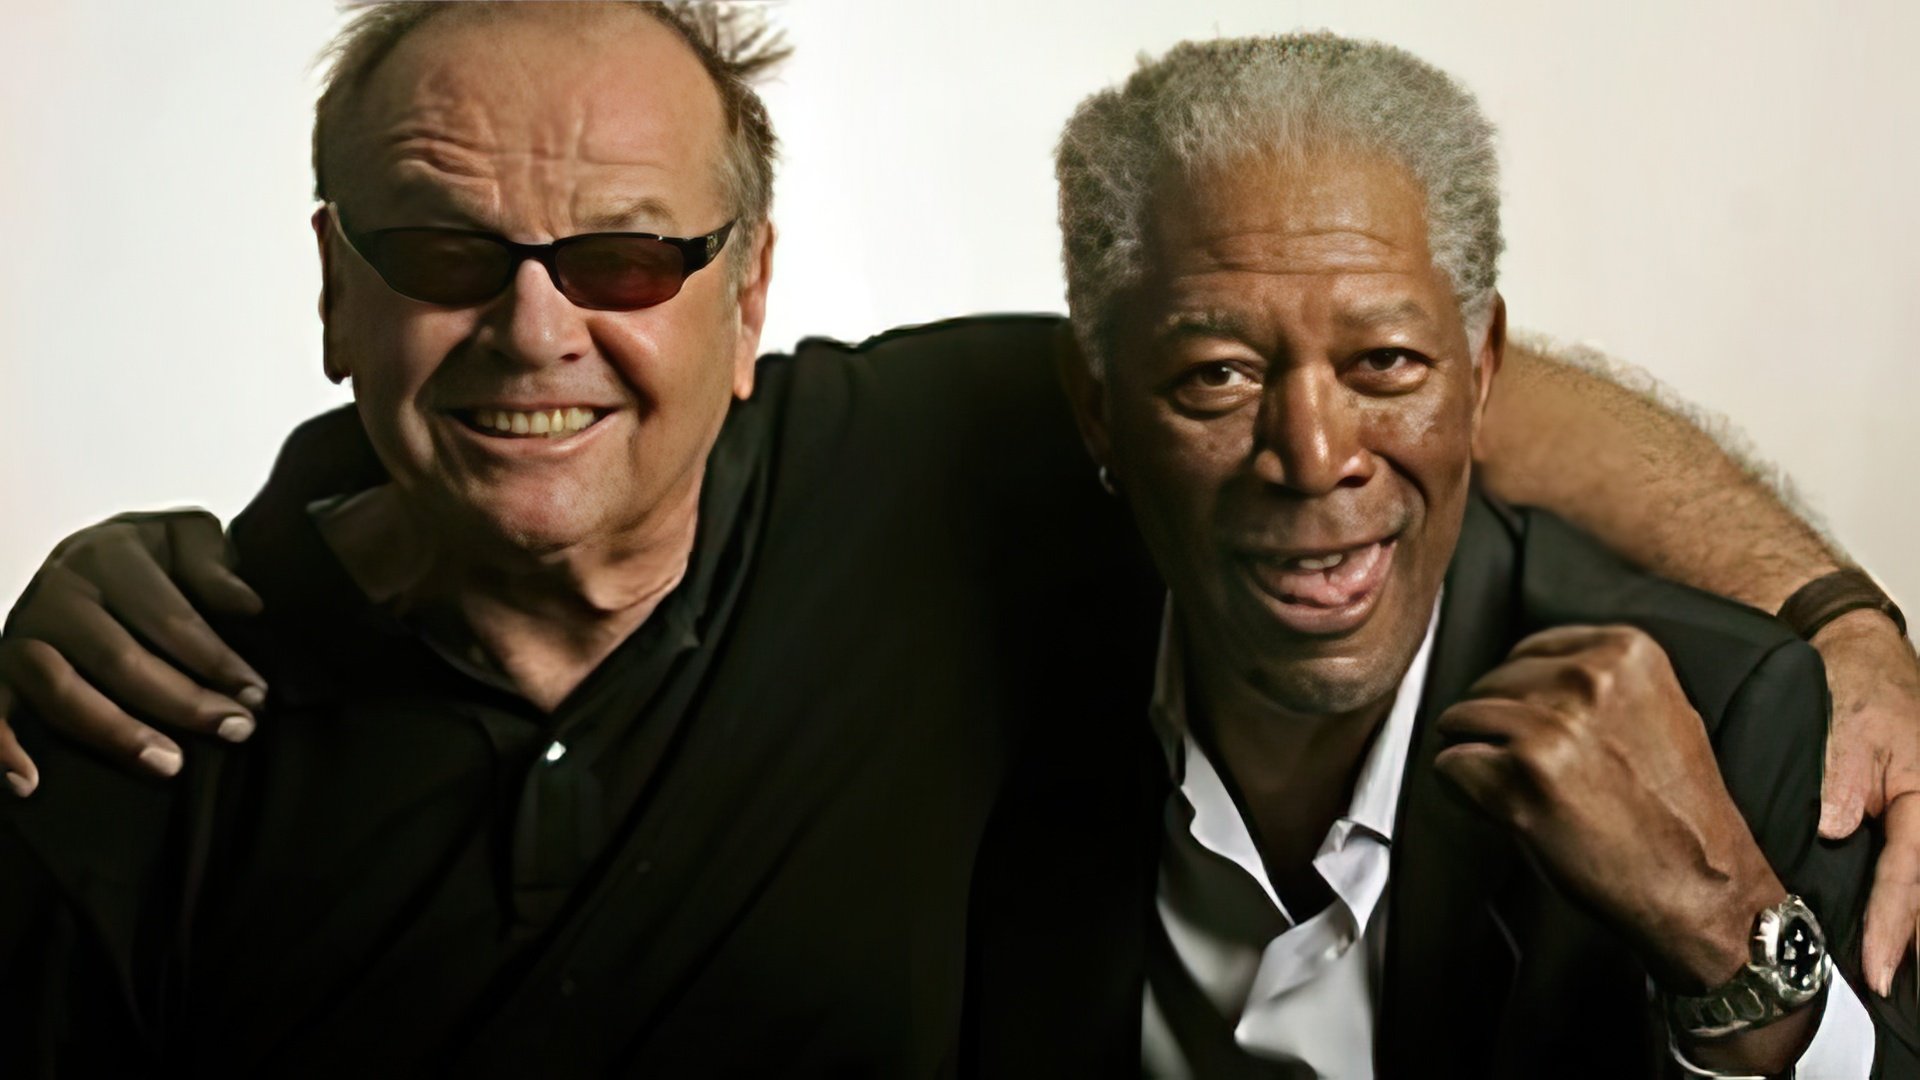 In 2007, Jack Nicholson and Morgan Freeman co-starred in a movie